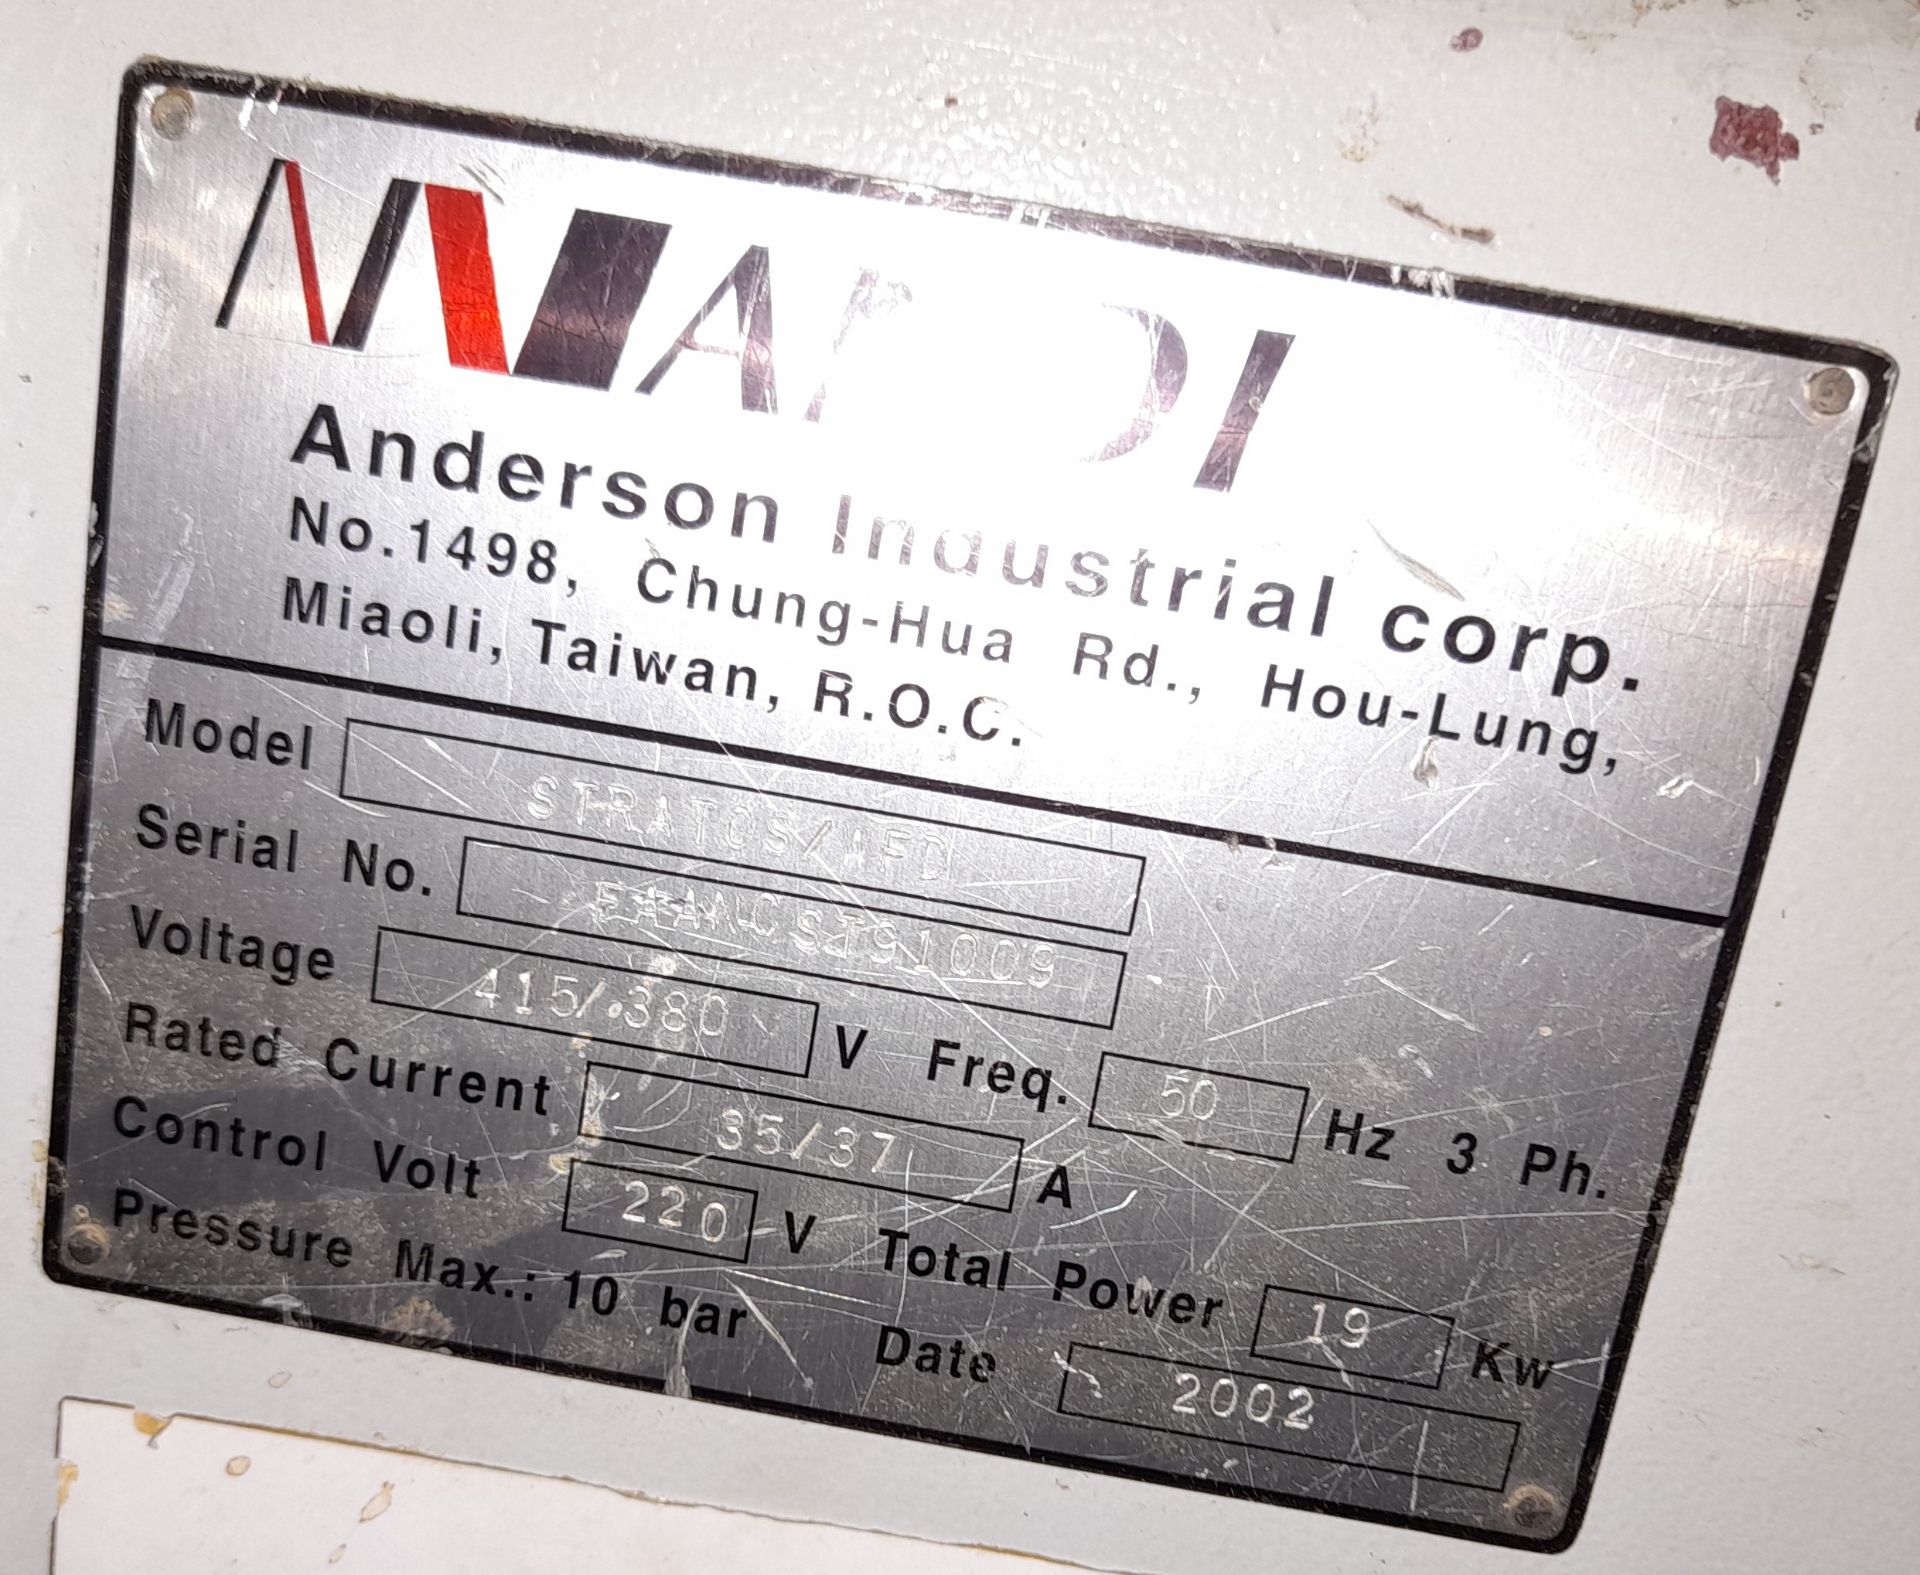 Andi Anderson Industrial Corp Stratos/WFD CNC Rout - Image 8 of 13